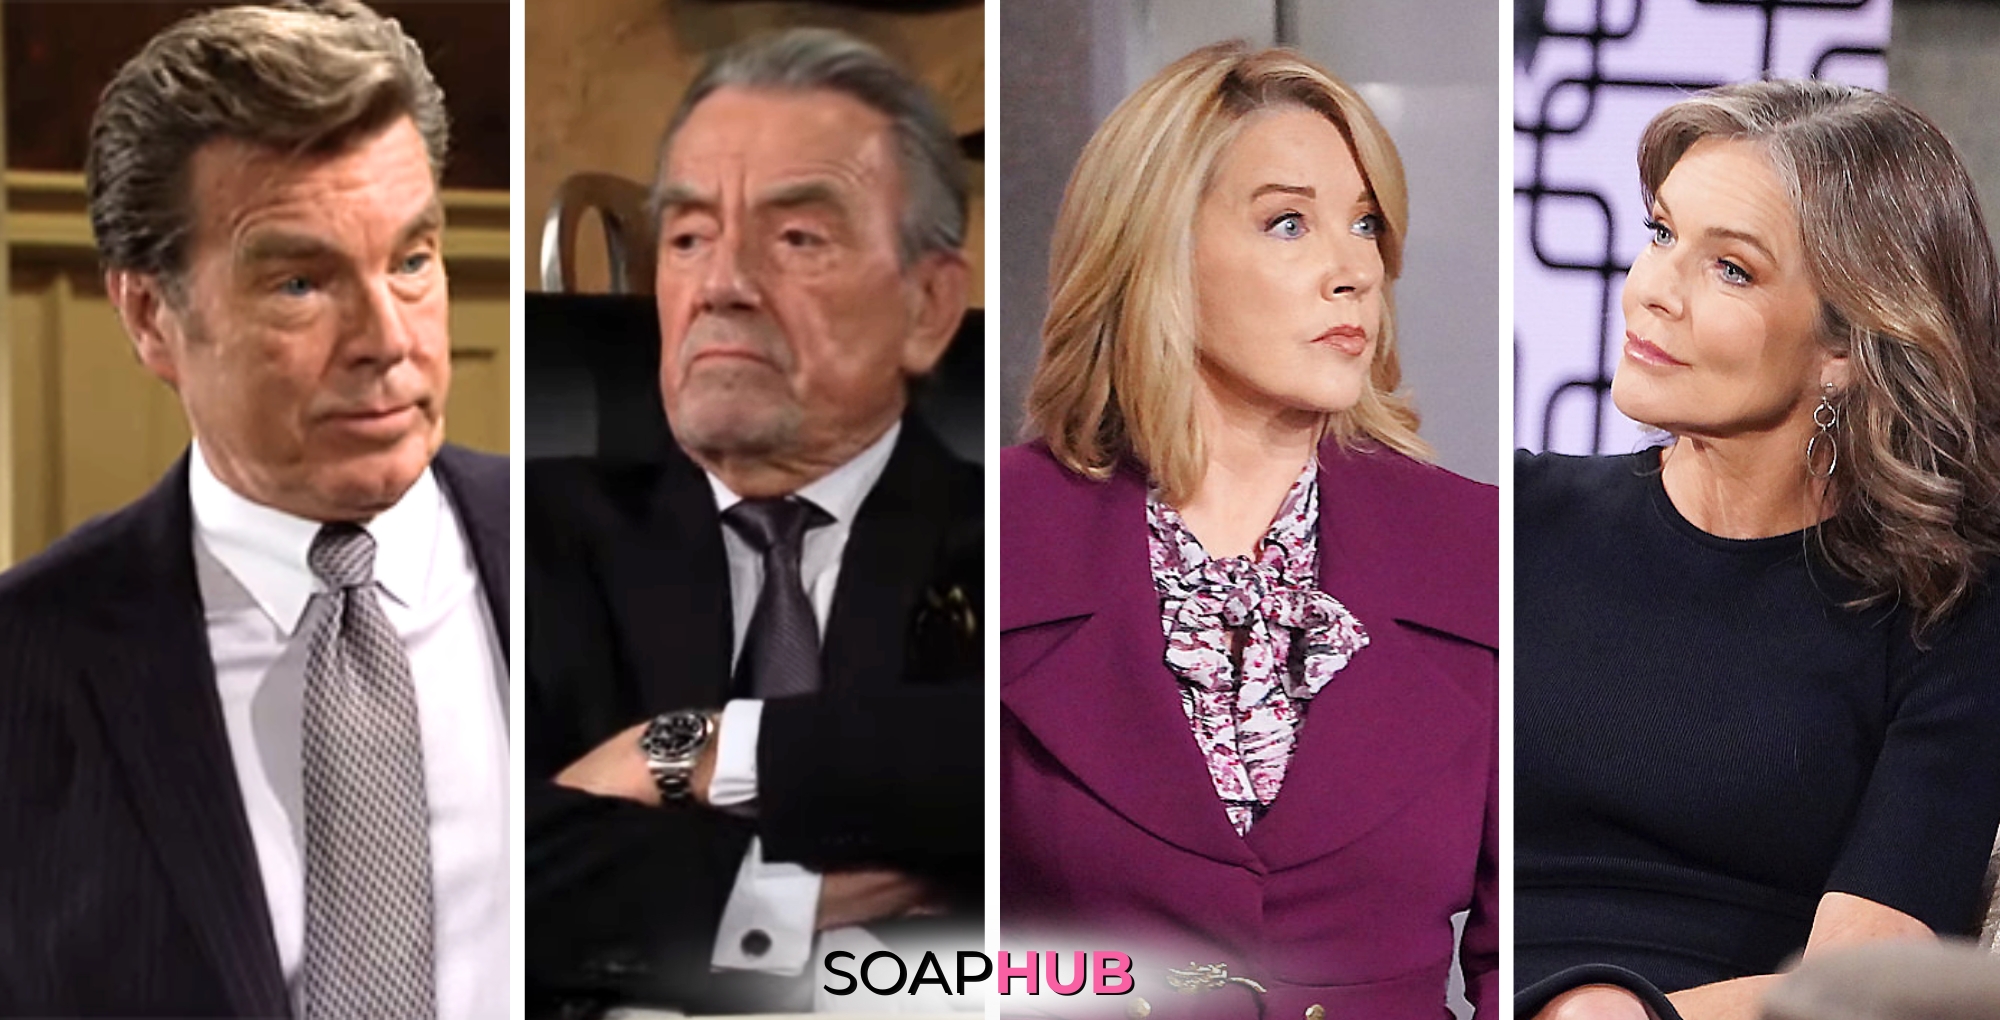 The Young and the Restless spoilers for June 14 feature Jack, Victor, Nikki, and Diane with the Soap Hub logo.